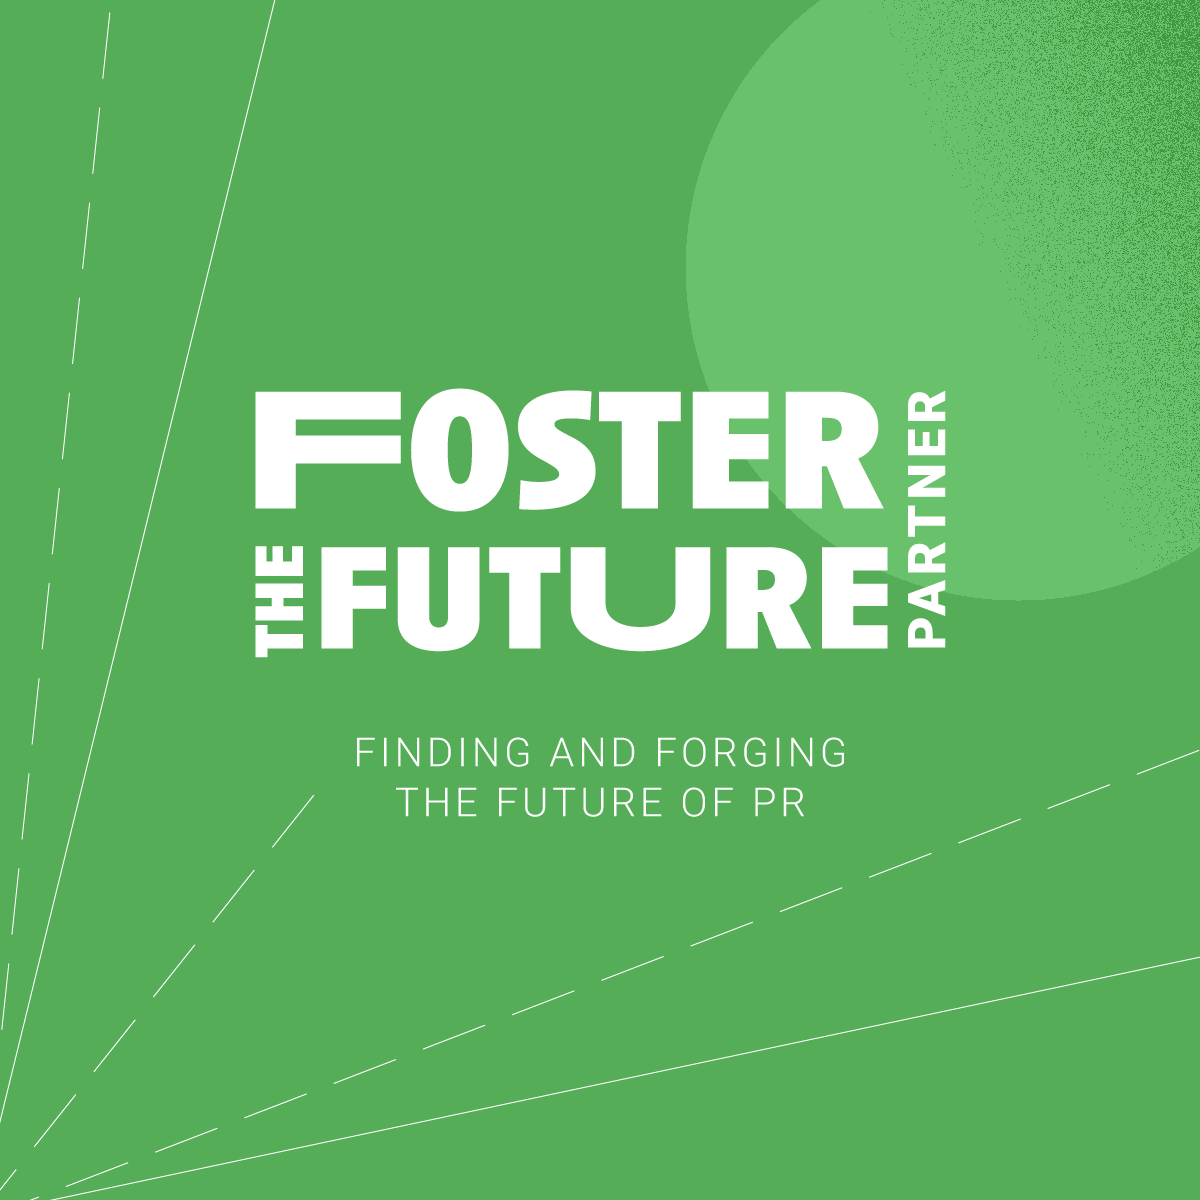 Foster the Future Partner: Finding and Fording the Future of PR